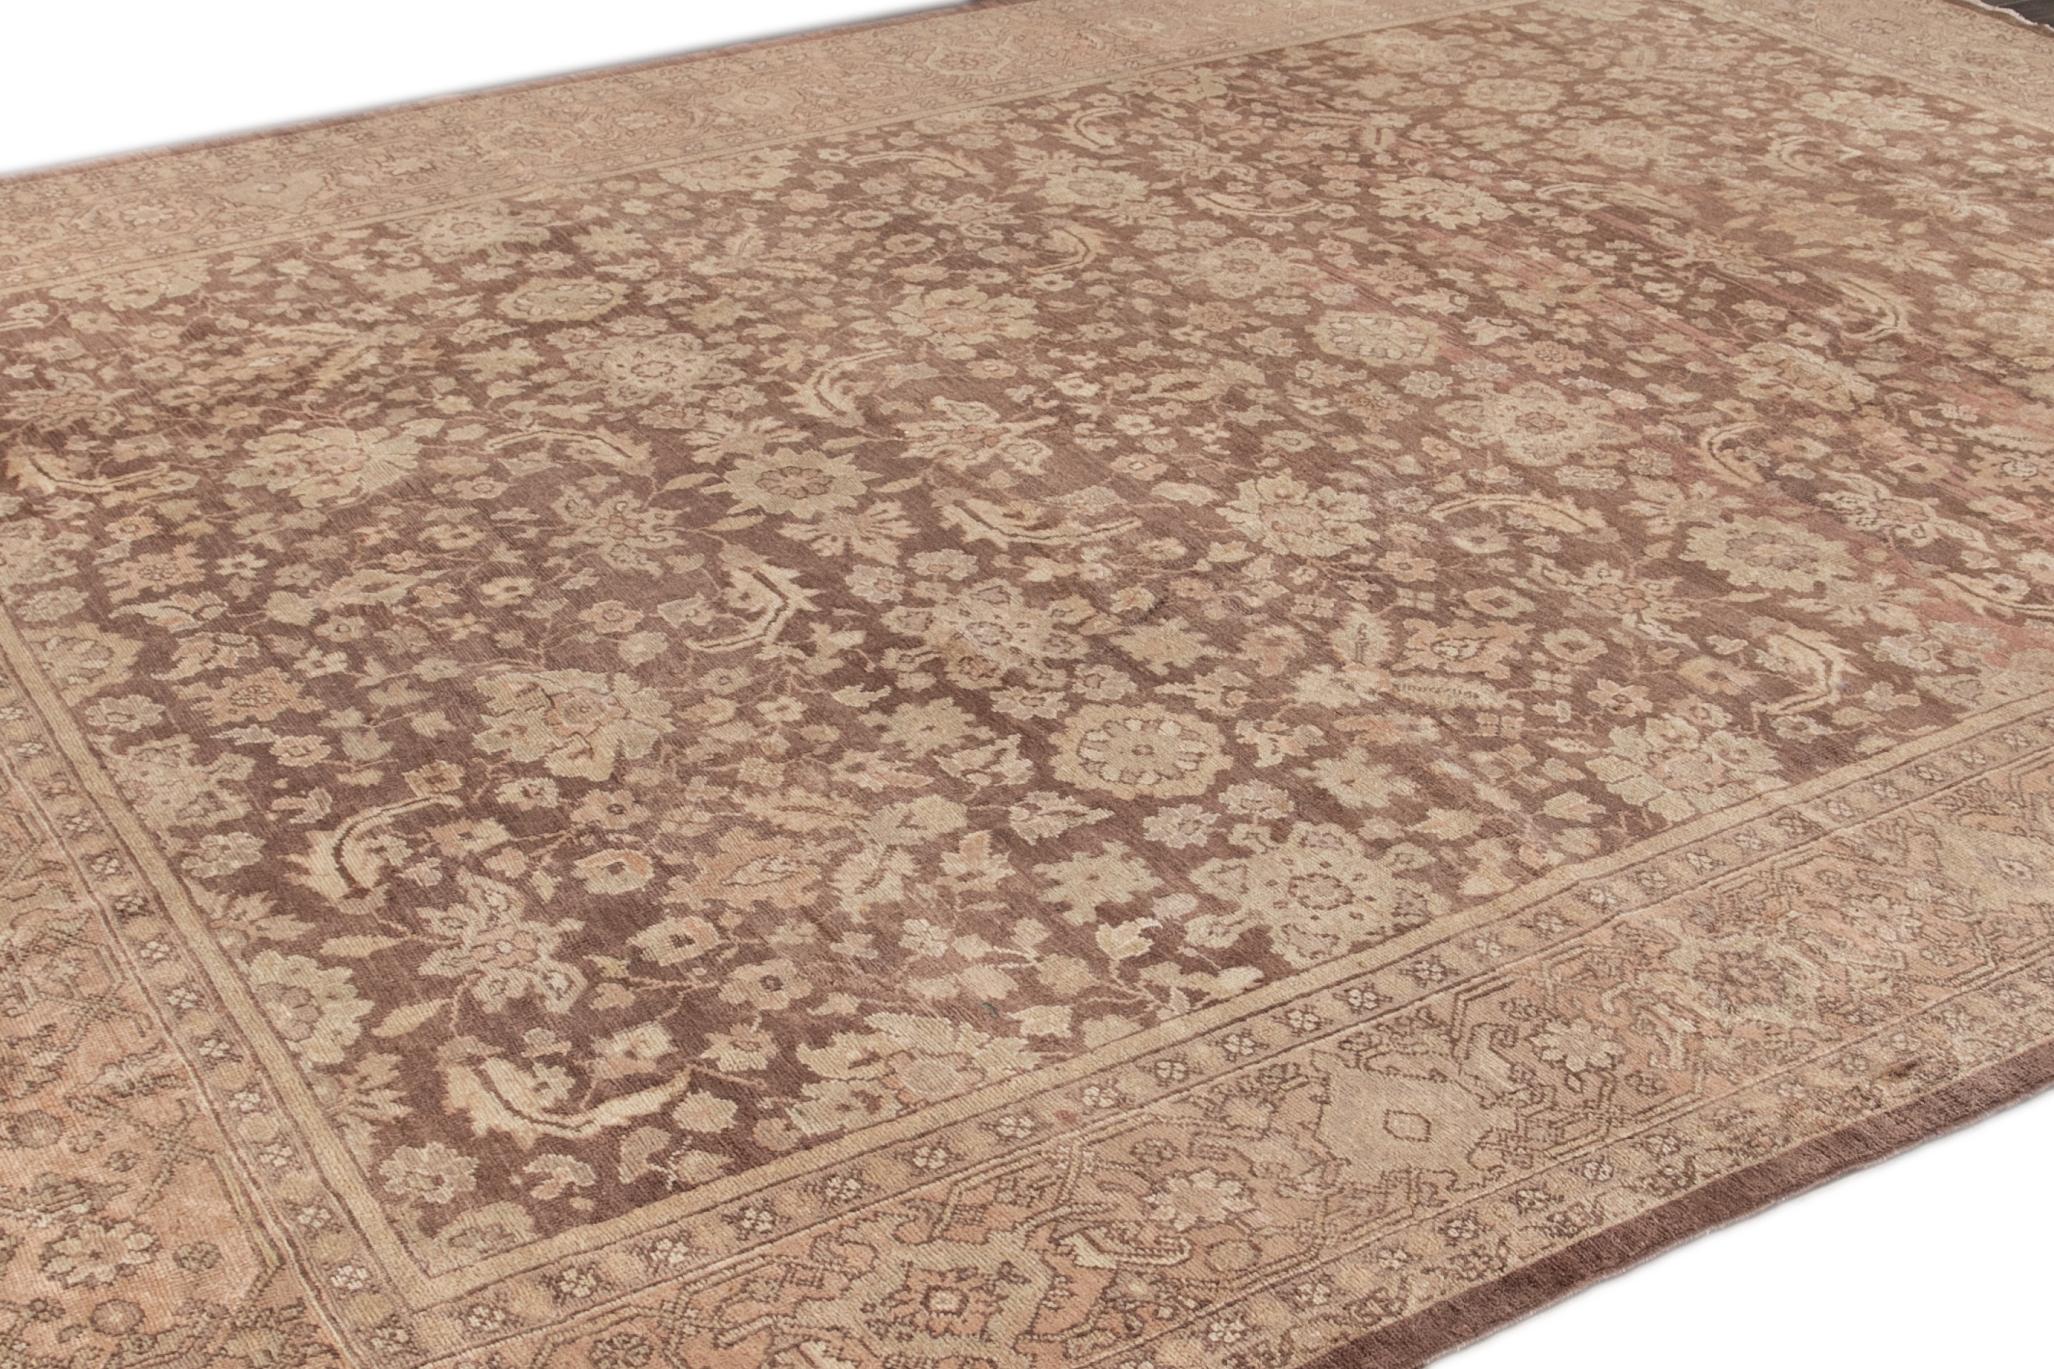 Antique Mahal Handmade Room Size Wool Rug In Distressed Condition For Sale In Norwalk, CT